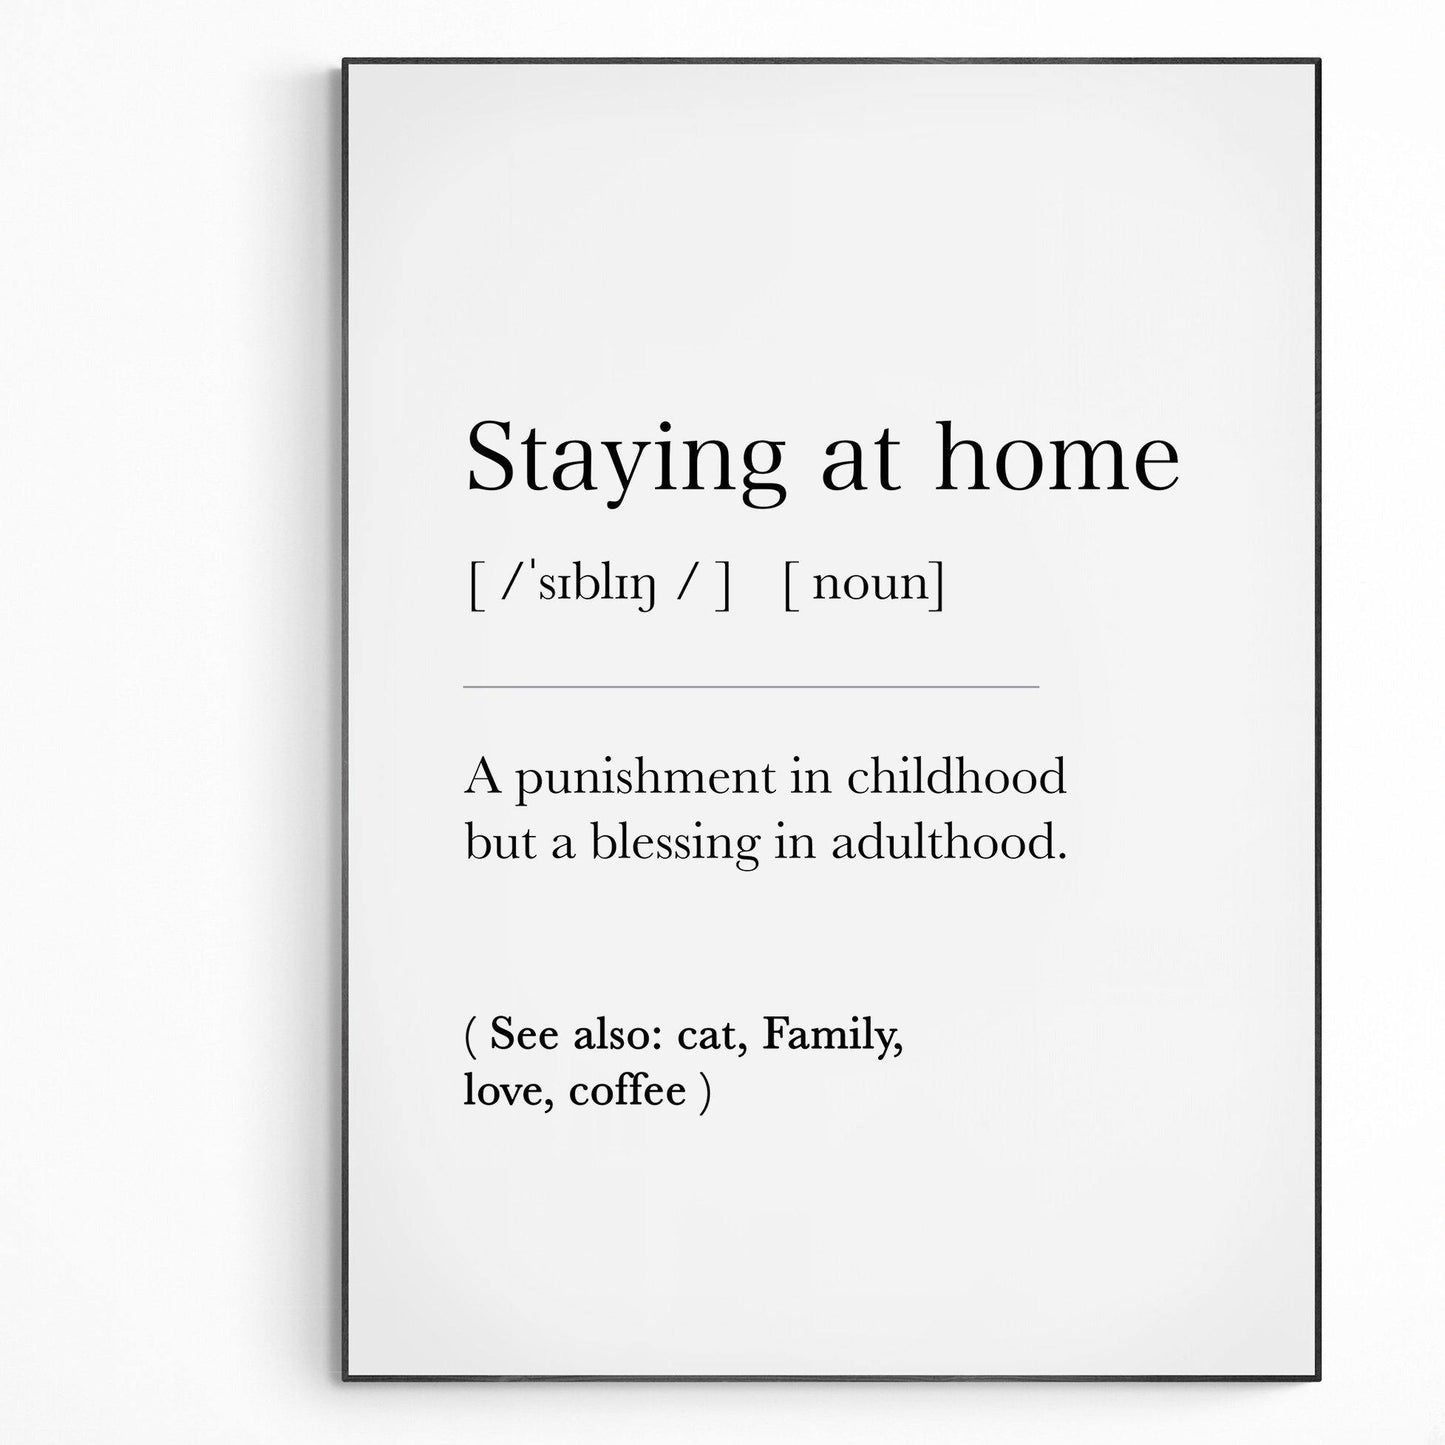 Staying at home